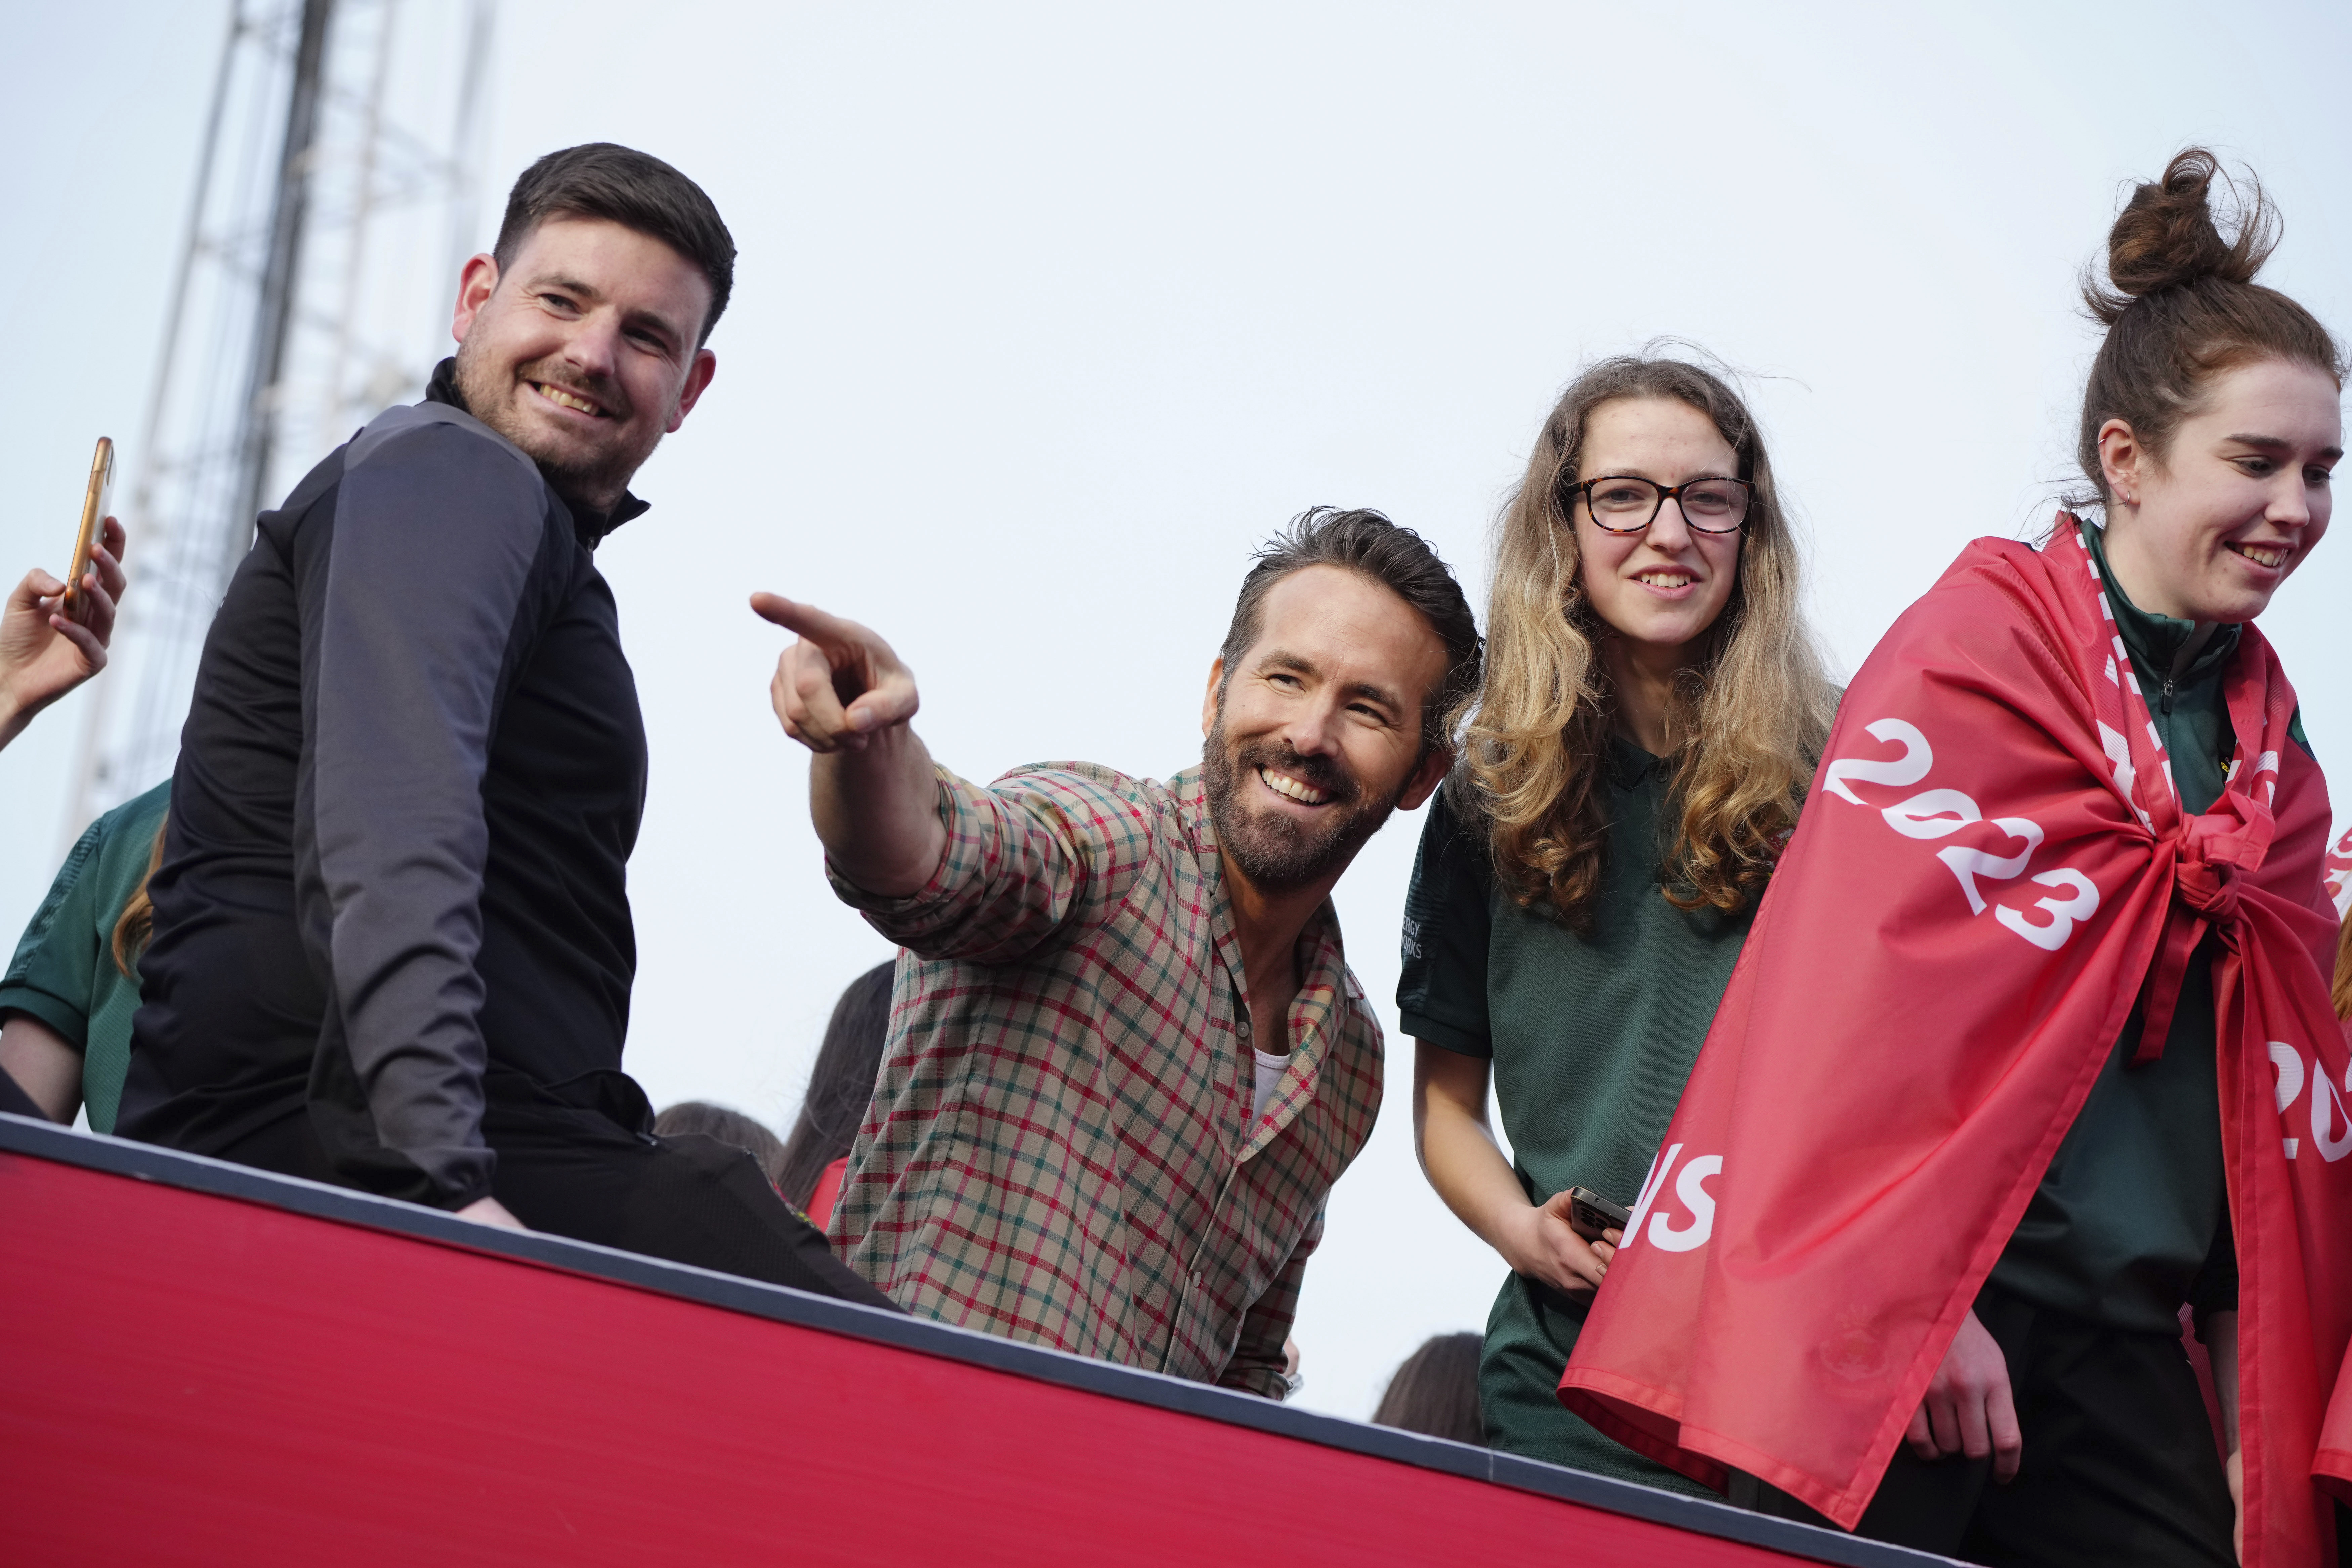 Ryan Reynolds’ Wrexham team owes him millions. What’s the financial hit?